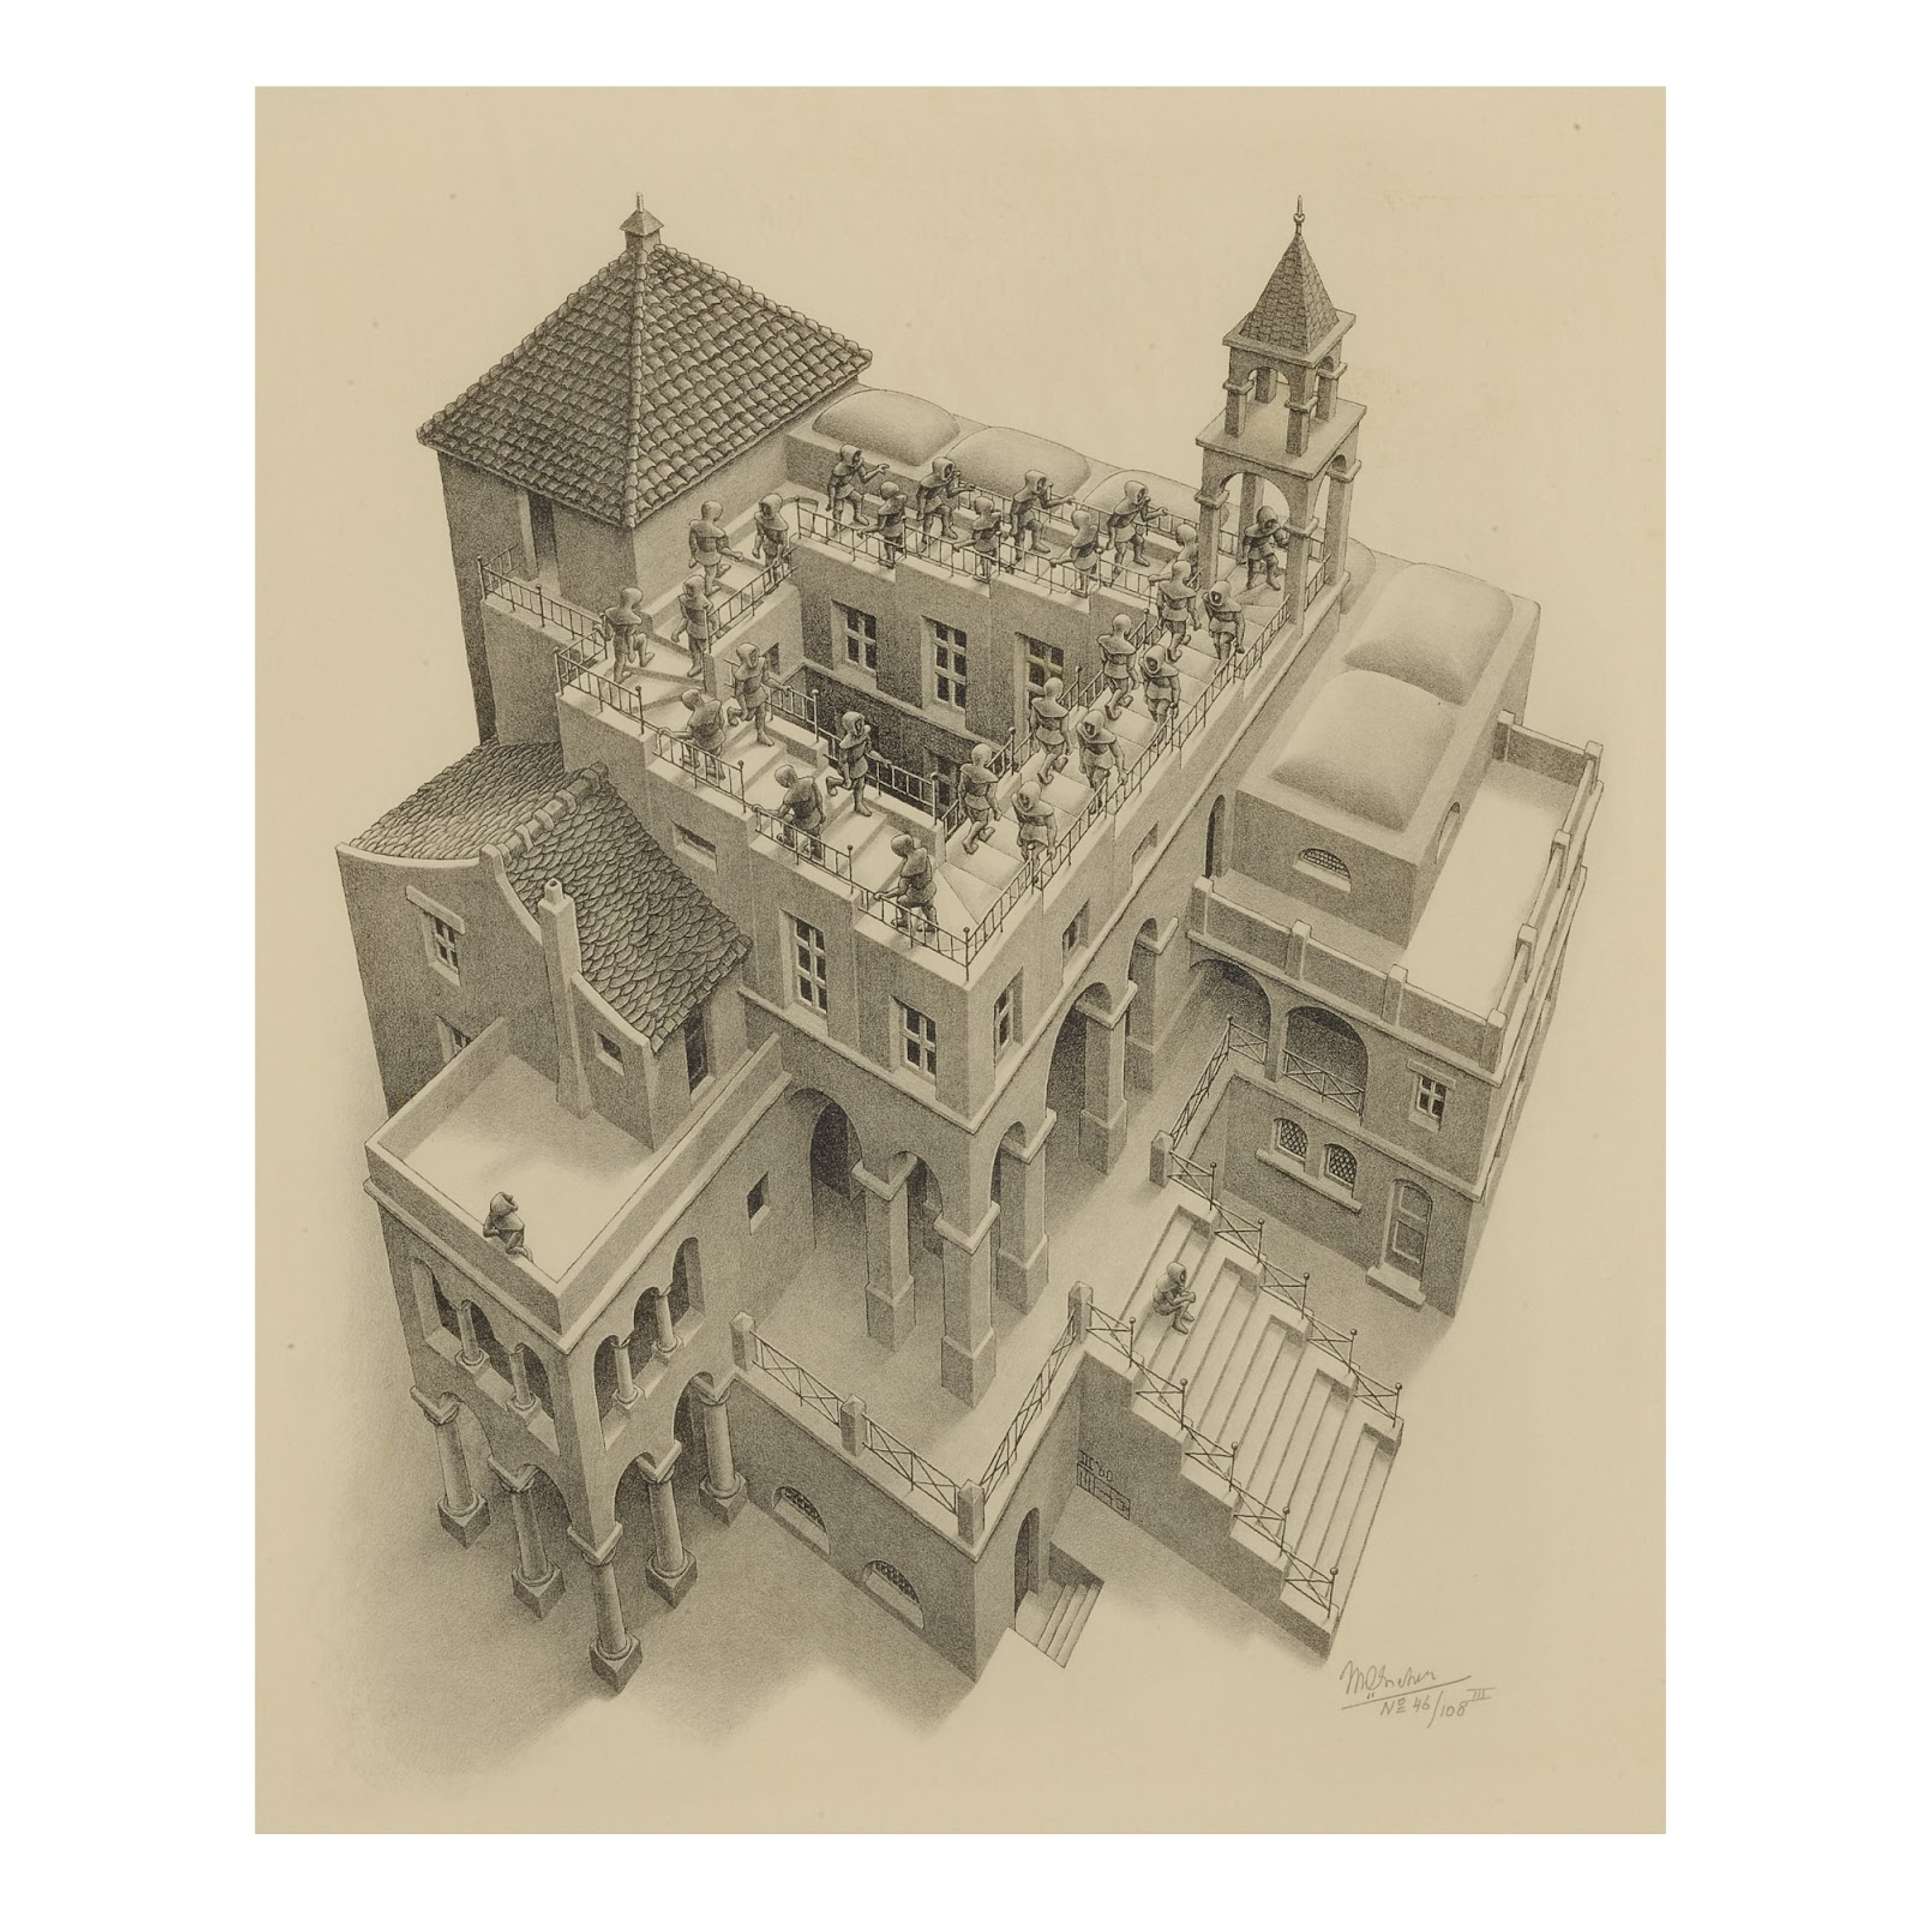 A lithograph print titled "Ascending and Descending" by M.C. Escher featuring figures dressed in robes and hats, endlessly ascending and descending a never-ending staircase in a geometrically impossible setting.